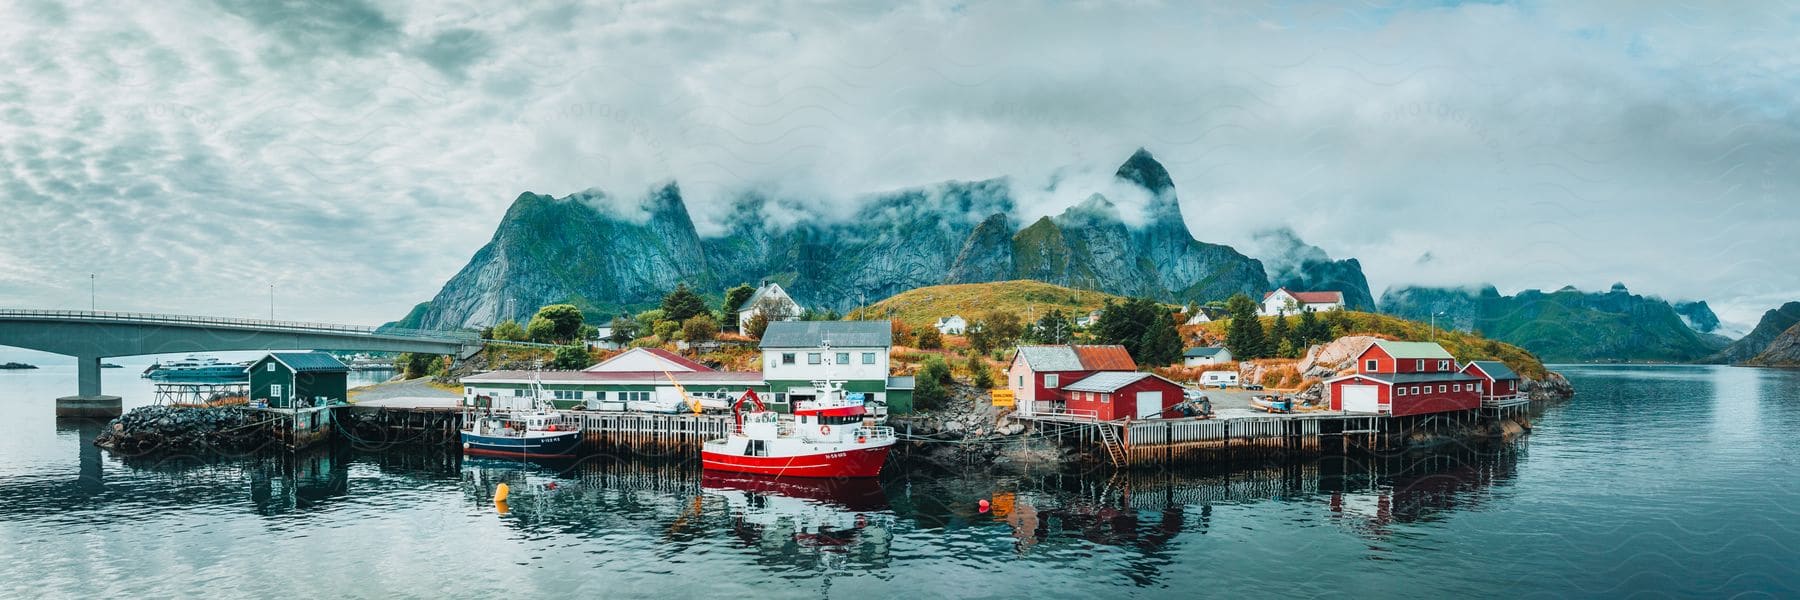 Ships are docked along the coast near houses and buildings as a bridge stretches to the Lofoten Island with mountains in the distance